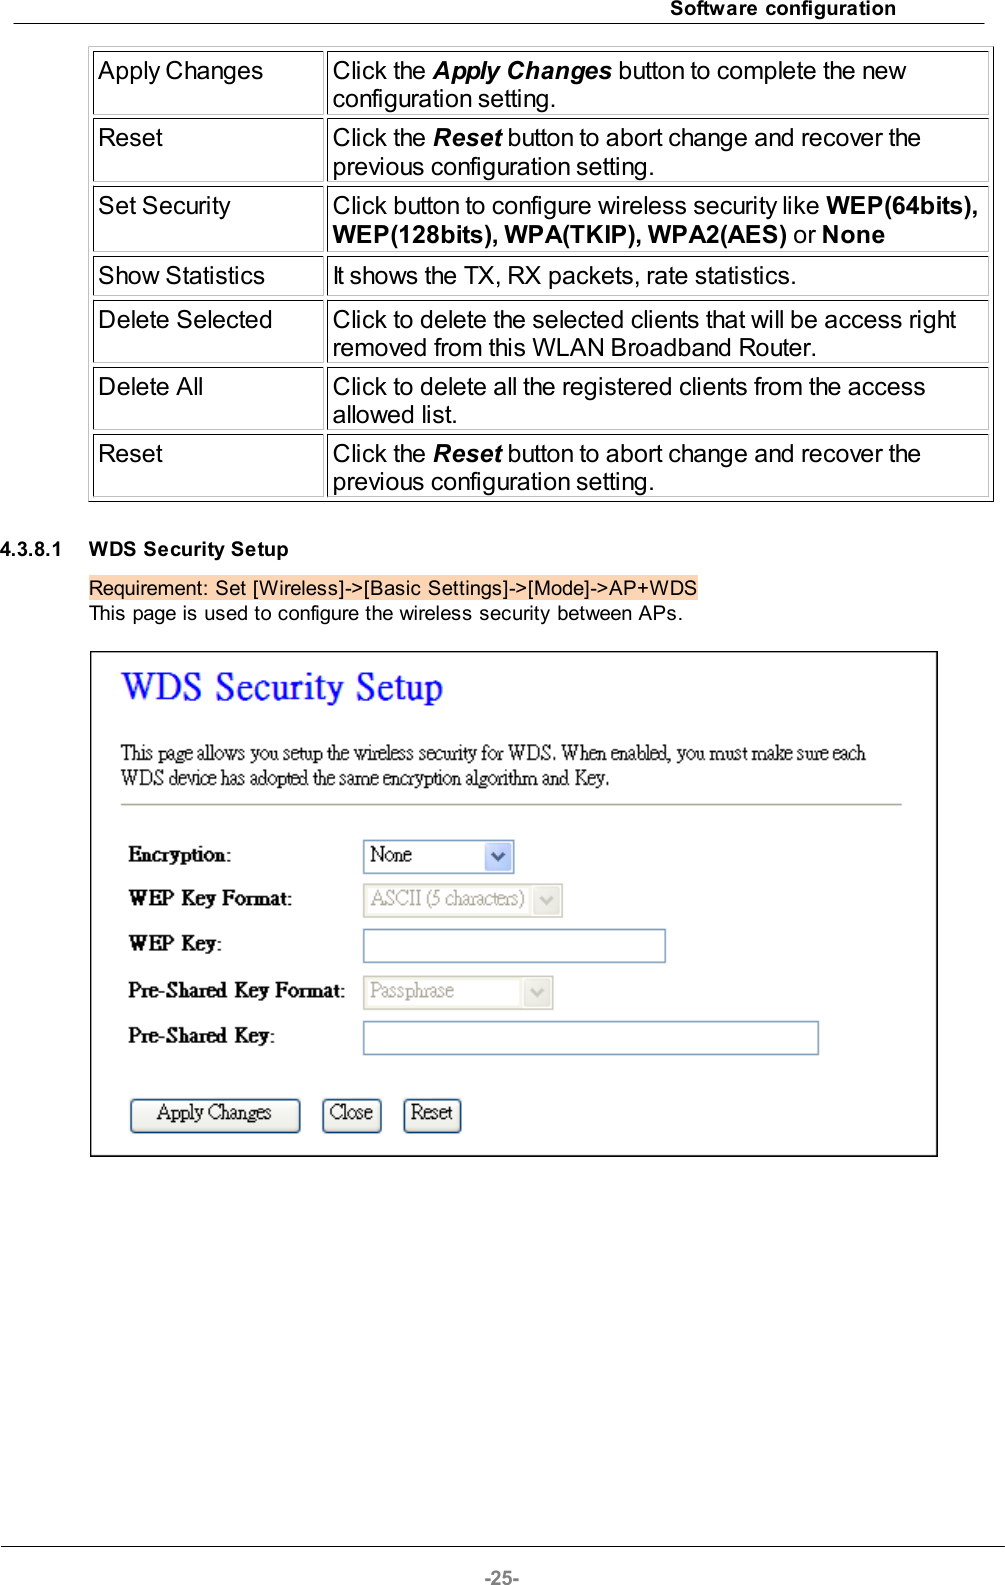 Software configuration-25-Apply Changes Click the Apply Changes button to complete the newconfiguration setting.Reset Click the Reset button to abort change and recover theprevious configuration setting.Set SecurityClick button to configure wireless security like WEP(64bits),WEP(128bits), WPA(TKIP), WPA2(AES) or NoneShow Statistics It shows the TX, RX packets, rate statistics.Delete SelectedClick to delete the selected clients that will be access rightremoved from this WLAN Broadband Router.Delete AllClick to delete all the registered clients from the accessallowed list.ResetClick the Reset button to abort change and recover theprevious configuration setting.4.3.8.1 WDS Security SetupRequirement: Set [Wireless]-&gt;[Basic Settings]-&gt;[Mode]-&gt;AP+WDSThis page is used to configure the wireless security between APs.